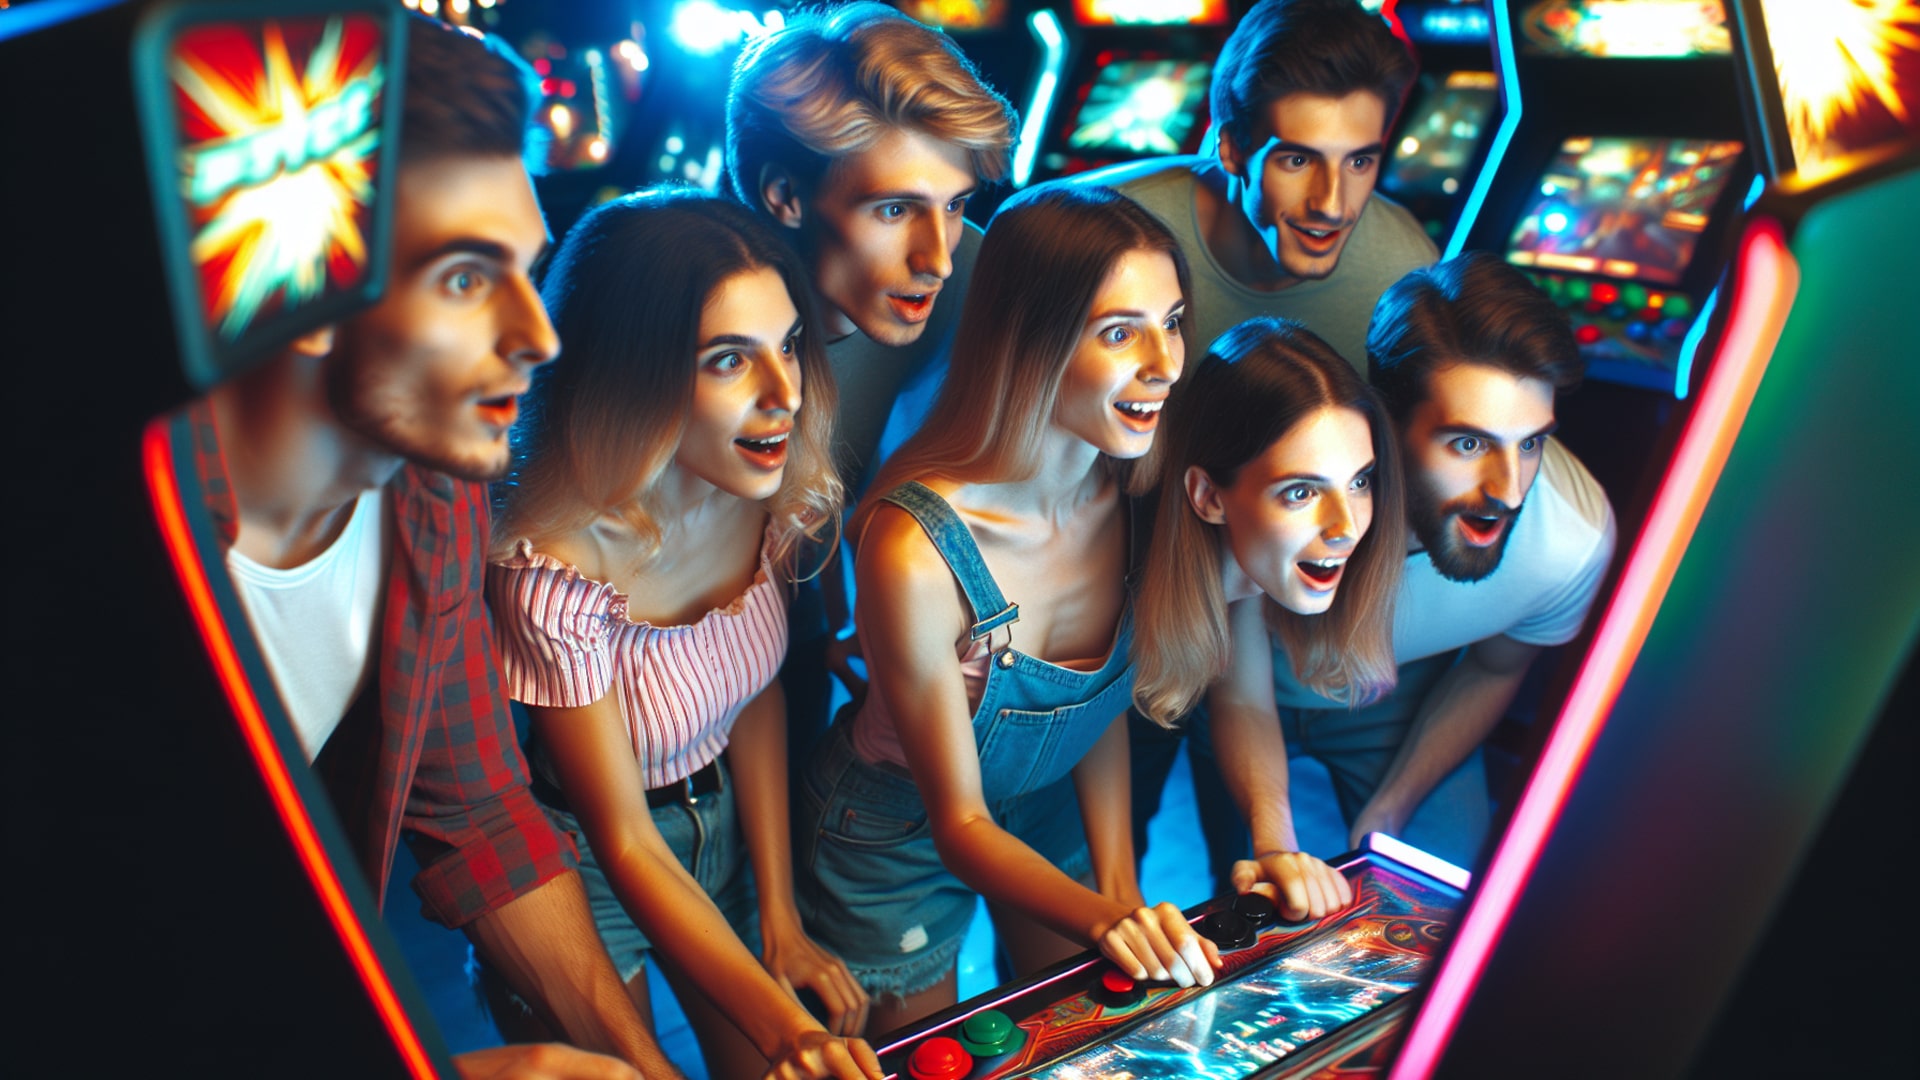 Exciting arcade gaming experience with friends